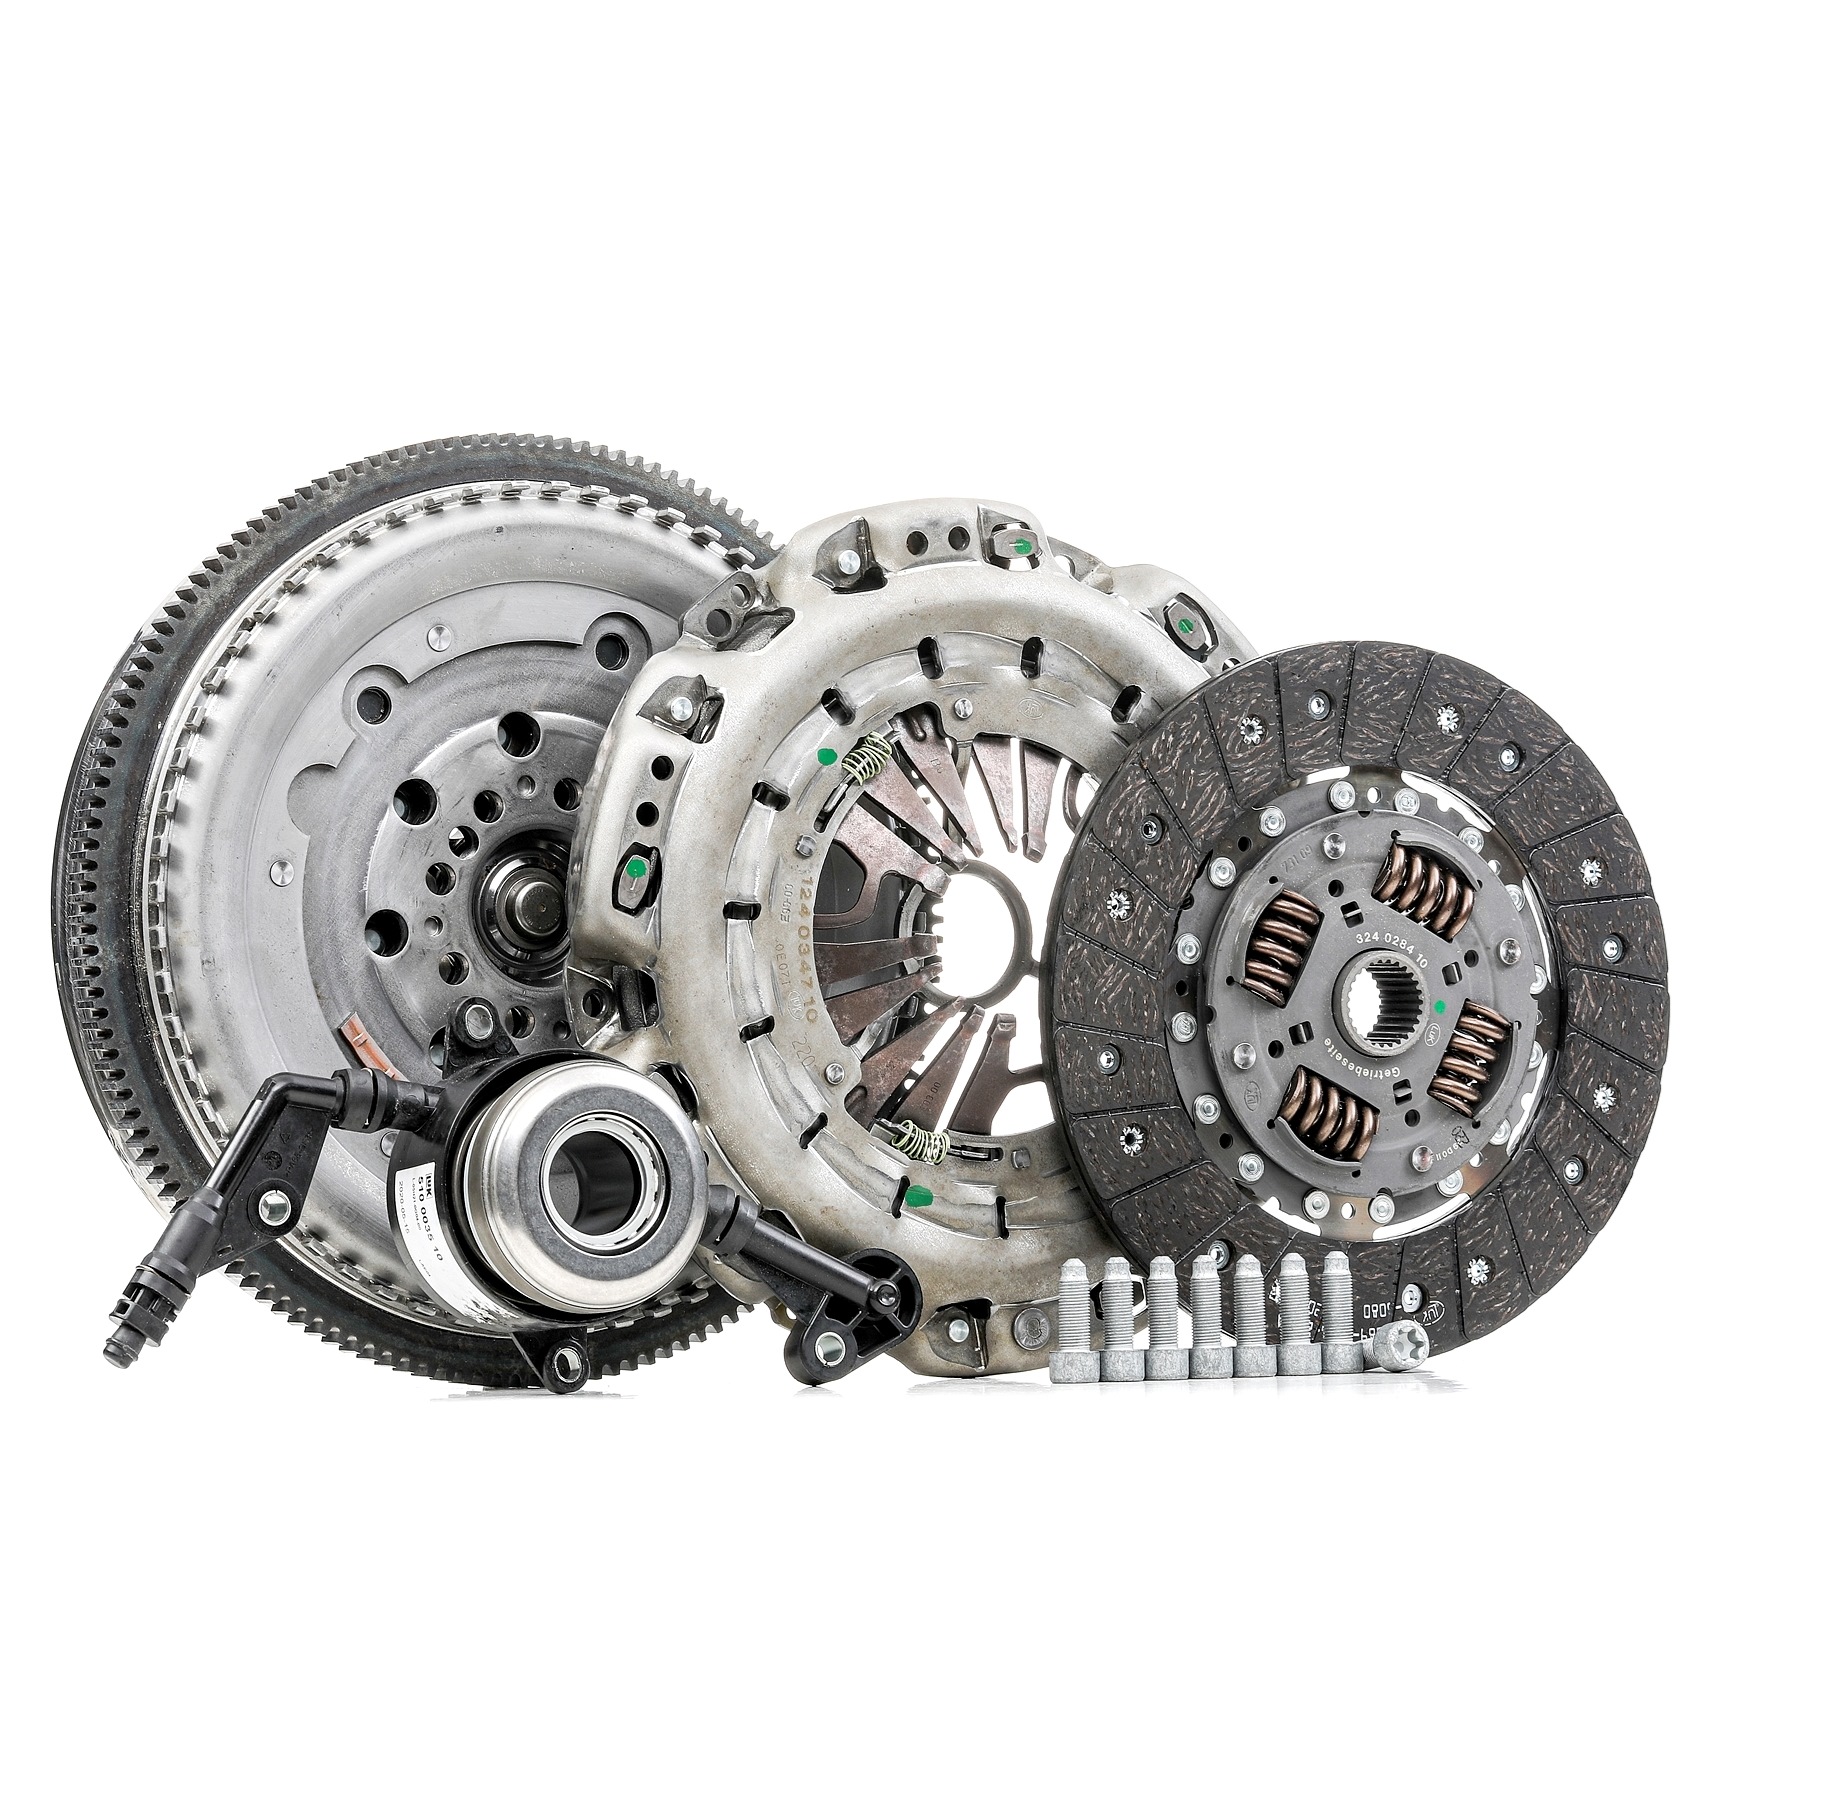 LuK 600 0290 00 Clutch kit with central slave cylinder, with pilot bearing, with flywheel, with screw set, Dual-mass flywheel with friction control plate, with automatic adjustment